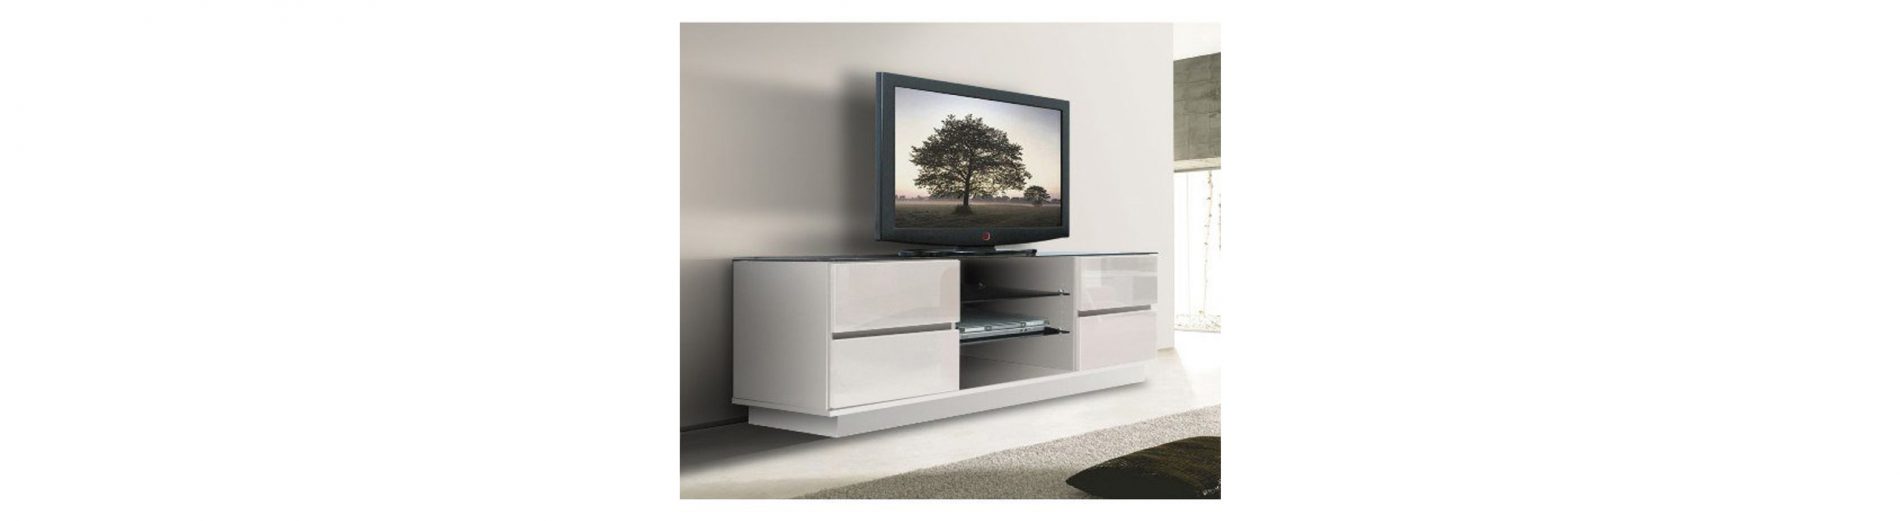 Tips on How to Choose the Right Plasma TV Stand for Your Home